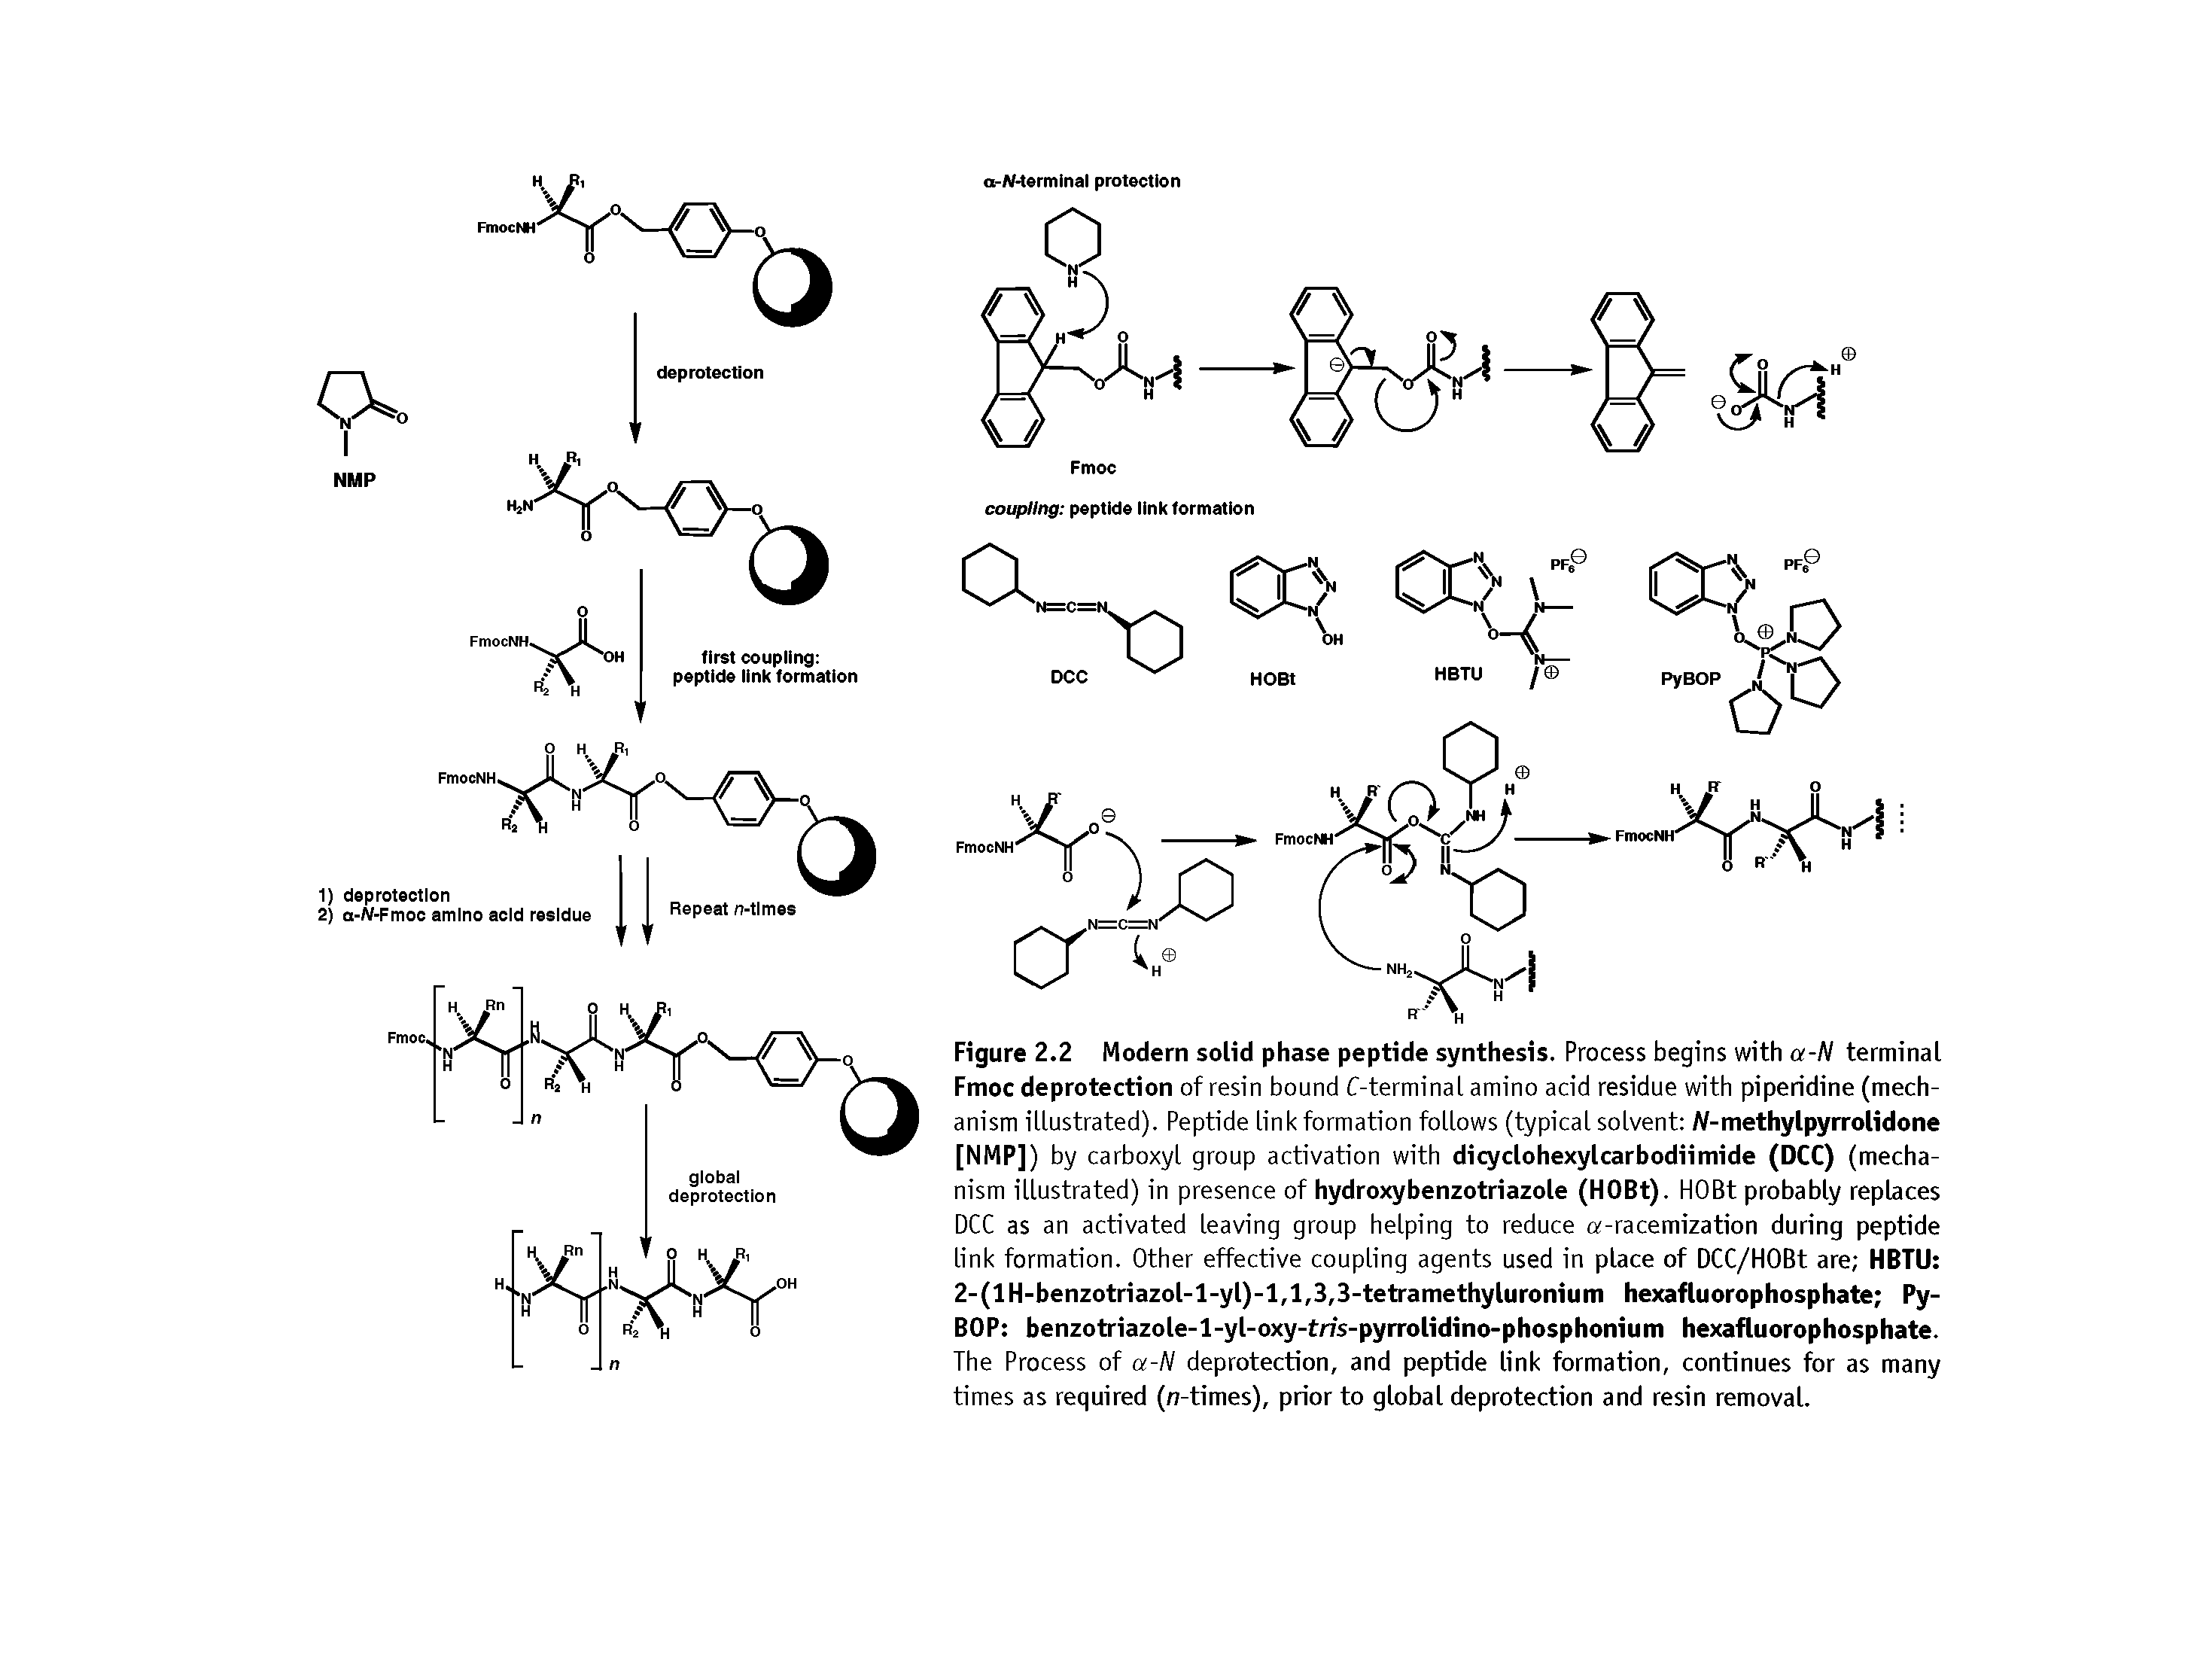 Figure 2.2 Modern solid phase peptide synthesis. Process begins with a-N terminal Fmoc deprotection of resin bound C-terminal amino acid residue with piperidine (mechanism illustrated). Peptide link formation follows (typical solvent Al-methylpyrrolidone [NMP]) by carboxyl group activation with dicyclohexylcarbodiimide (DCC) (mechanism illustrated) in presence of hydroxybenzotriazole (HOBt). HOBt probably replaces DCC as an activated leaving group helping to reduce a-racemization during peptide link formation. Other effective coupling agents used in place of DCC/HOBt are HBTU 2-(lH-benzotriazol-l-yl)-l,l,3,3-tetramethyluronium hexafluorophosphate Py-BOP benzotriazole-l-yl-oxy-tns-pyrrolidino-phosphonium hexafluorophosphate. The Process of a-N deprotection, and peptide link formation, continues for as many times as required (n-times), prior to global deprotection and resin removal.